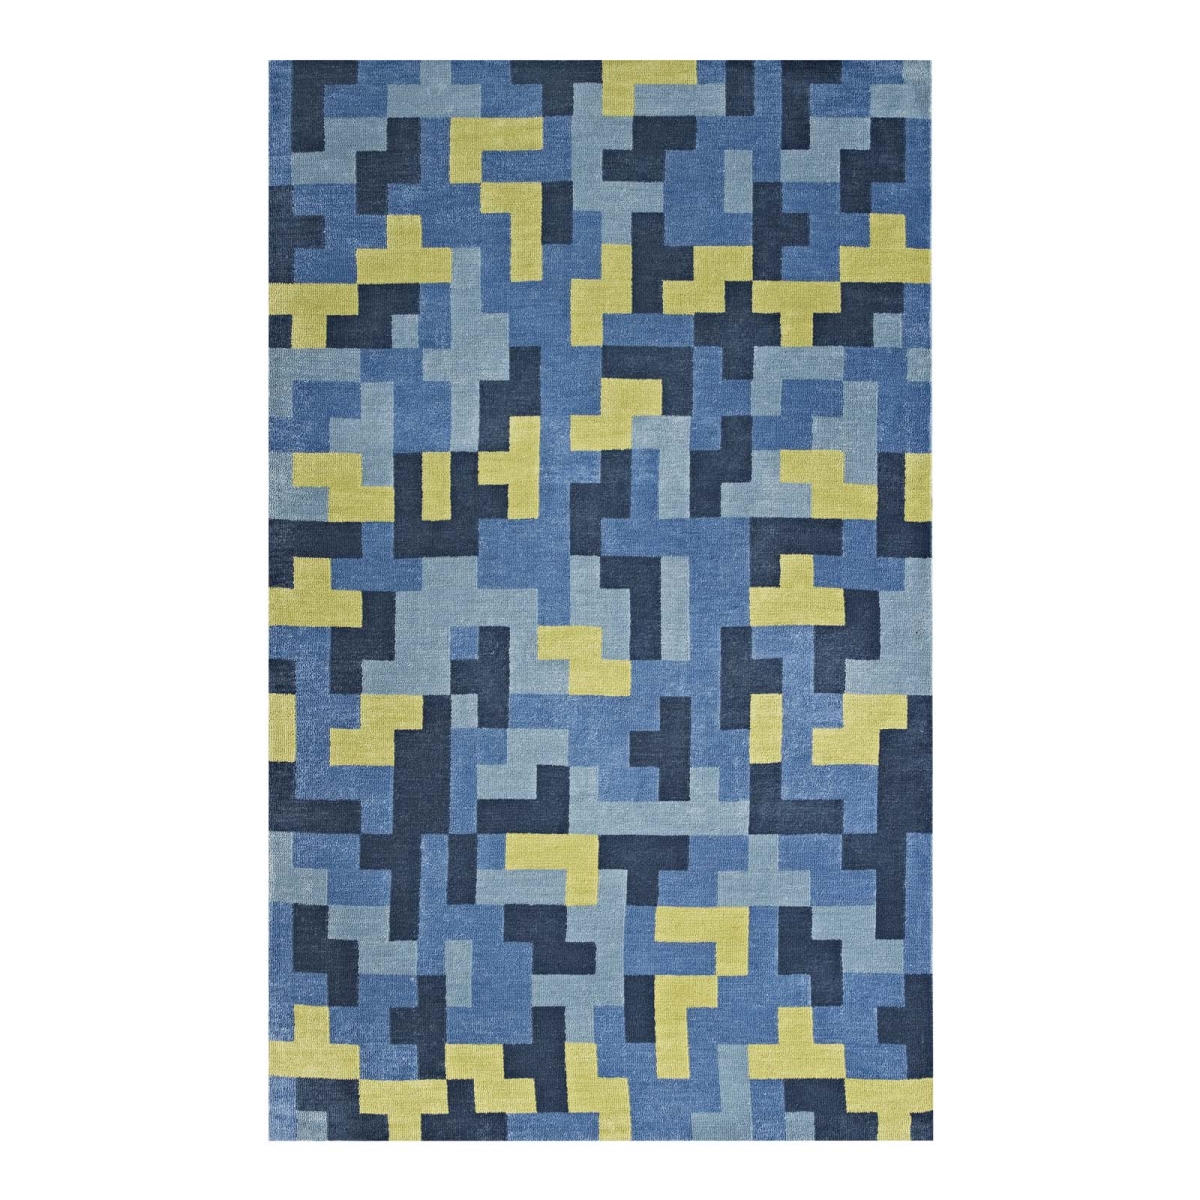 R-1022a-58 5 X 8 Ft. Andela Interlocking Block Mosaic Polyester Area Rug - Multicolored Blue & Light Olive Green, 0.5 X 60 X 96 In.